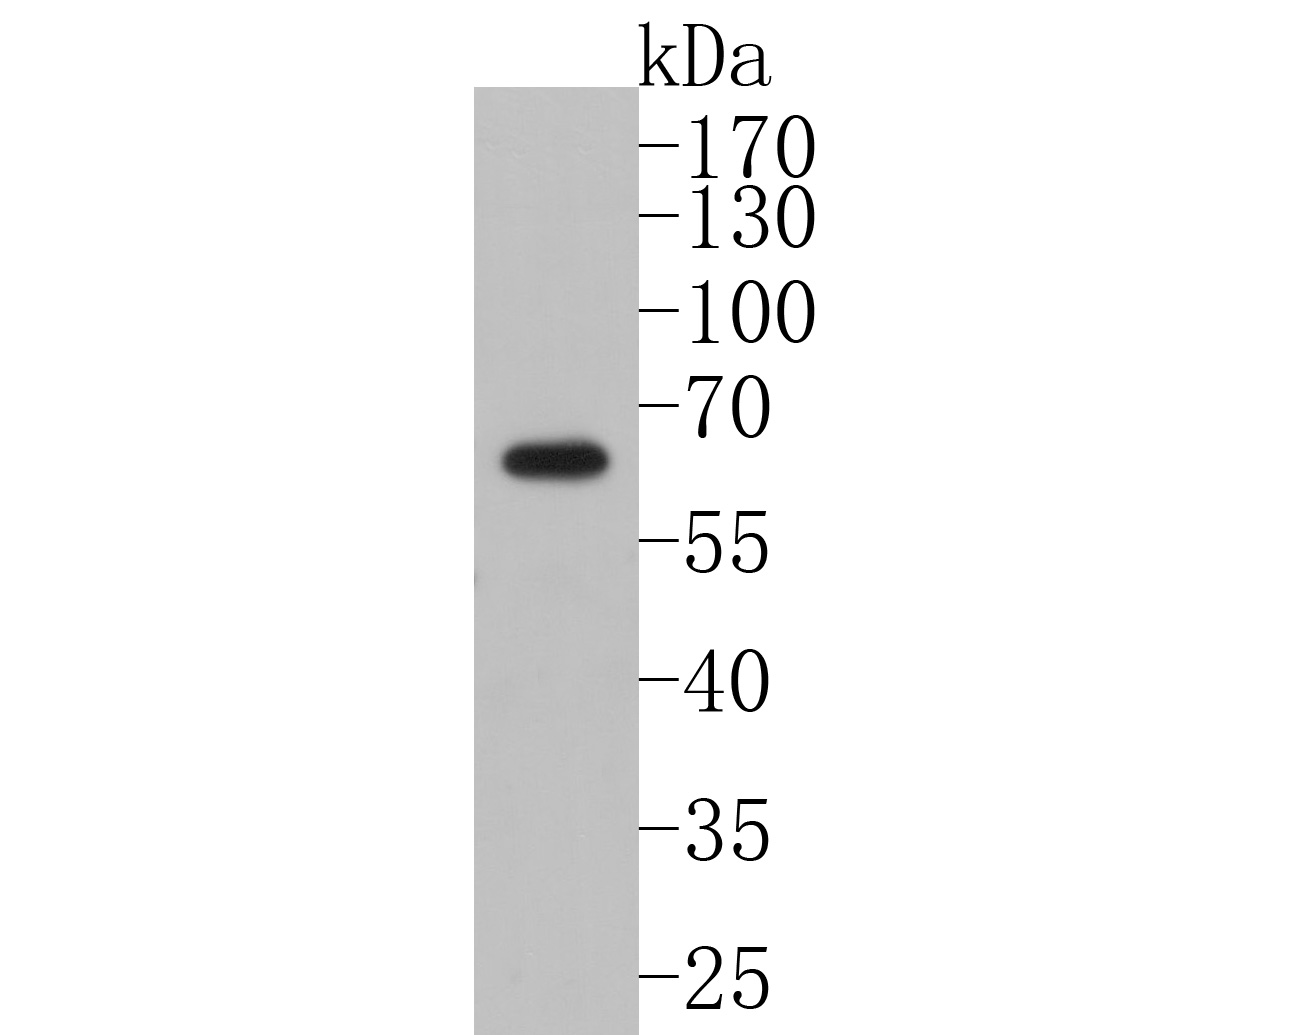 Western blot analysis of PAK1 on HL-60 cell lysates. Proteins were transferred to a PVDF membrane and blocked with 5% BSA in PBS for 1 hour at room temperature. The primary antibody (ET7111-33, 1/500) was used in 5% BSA at room temperature for 2 hours. Goat Anti-Rabbit IgG - HRP Secondary Antibody (HA1001) at 1:5,000 dilution was used for 1 hour at room temperature.